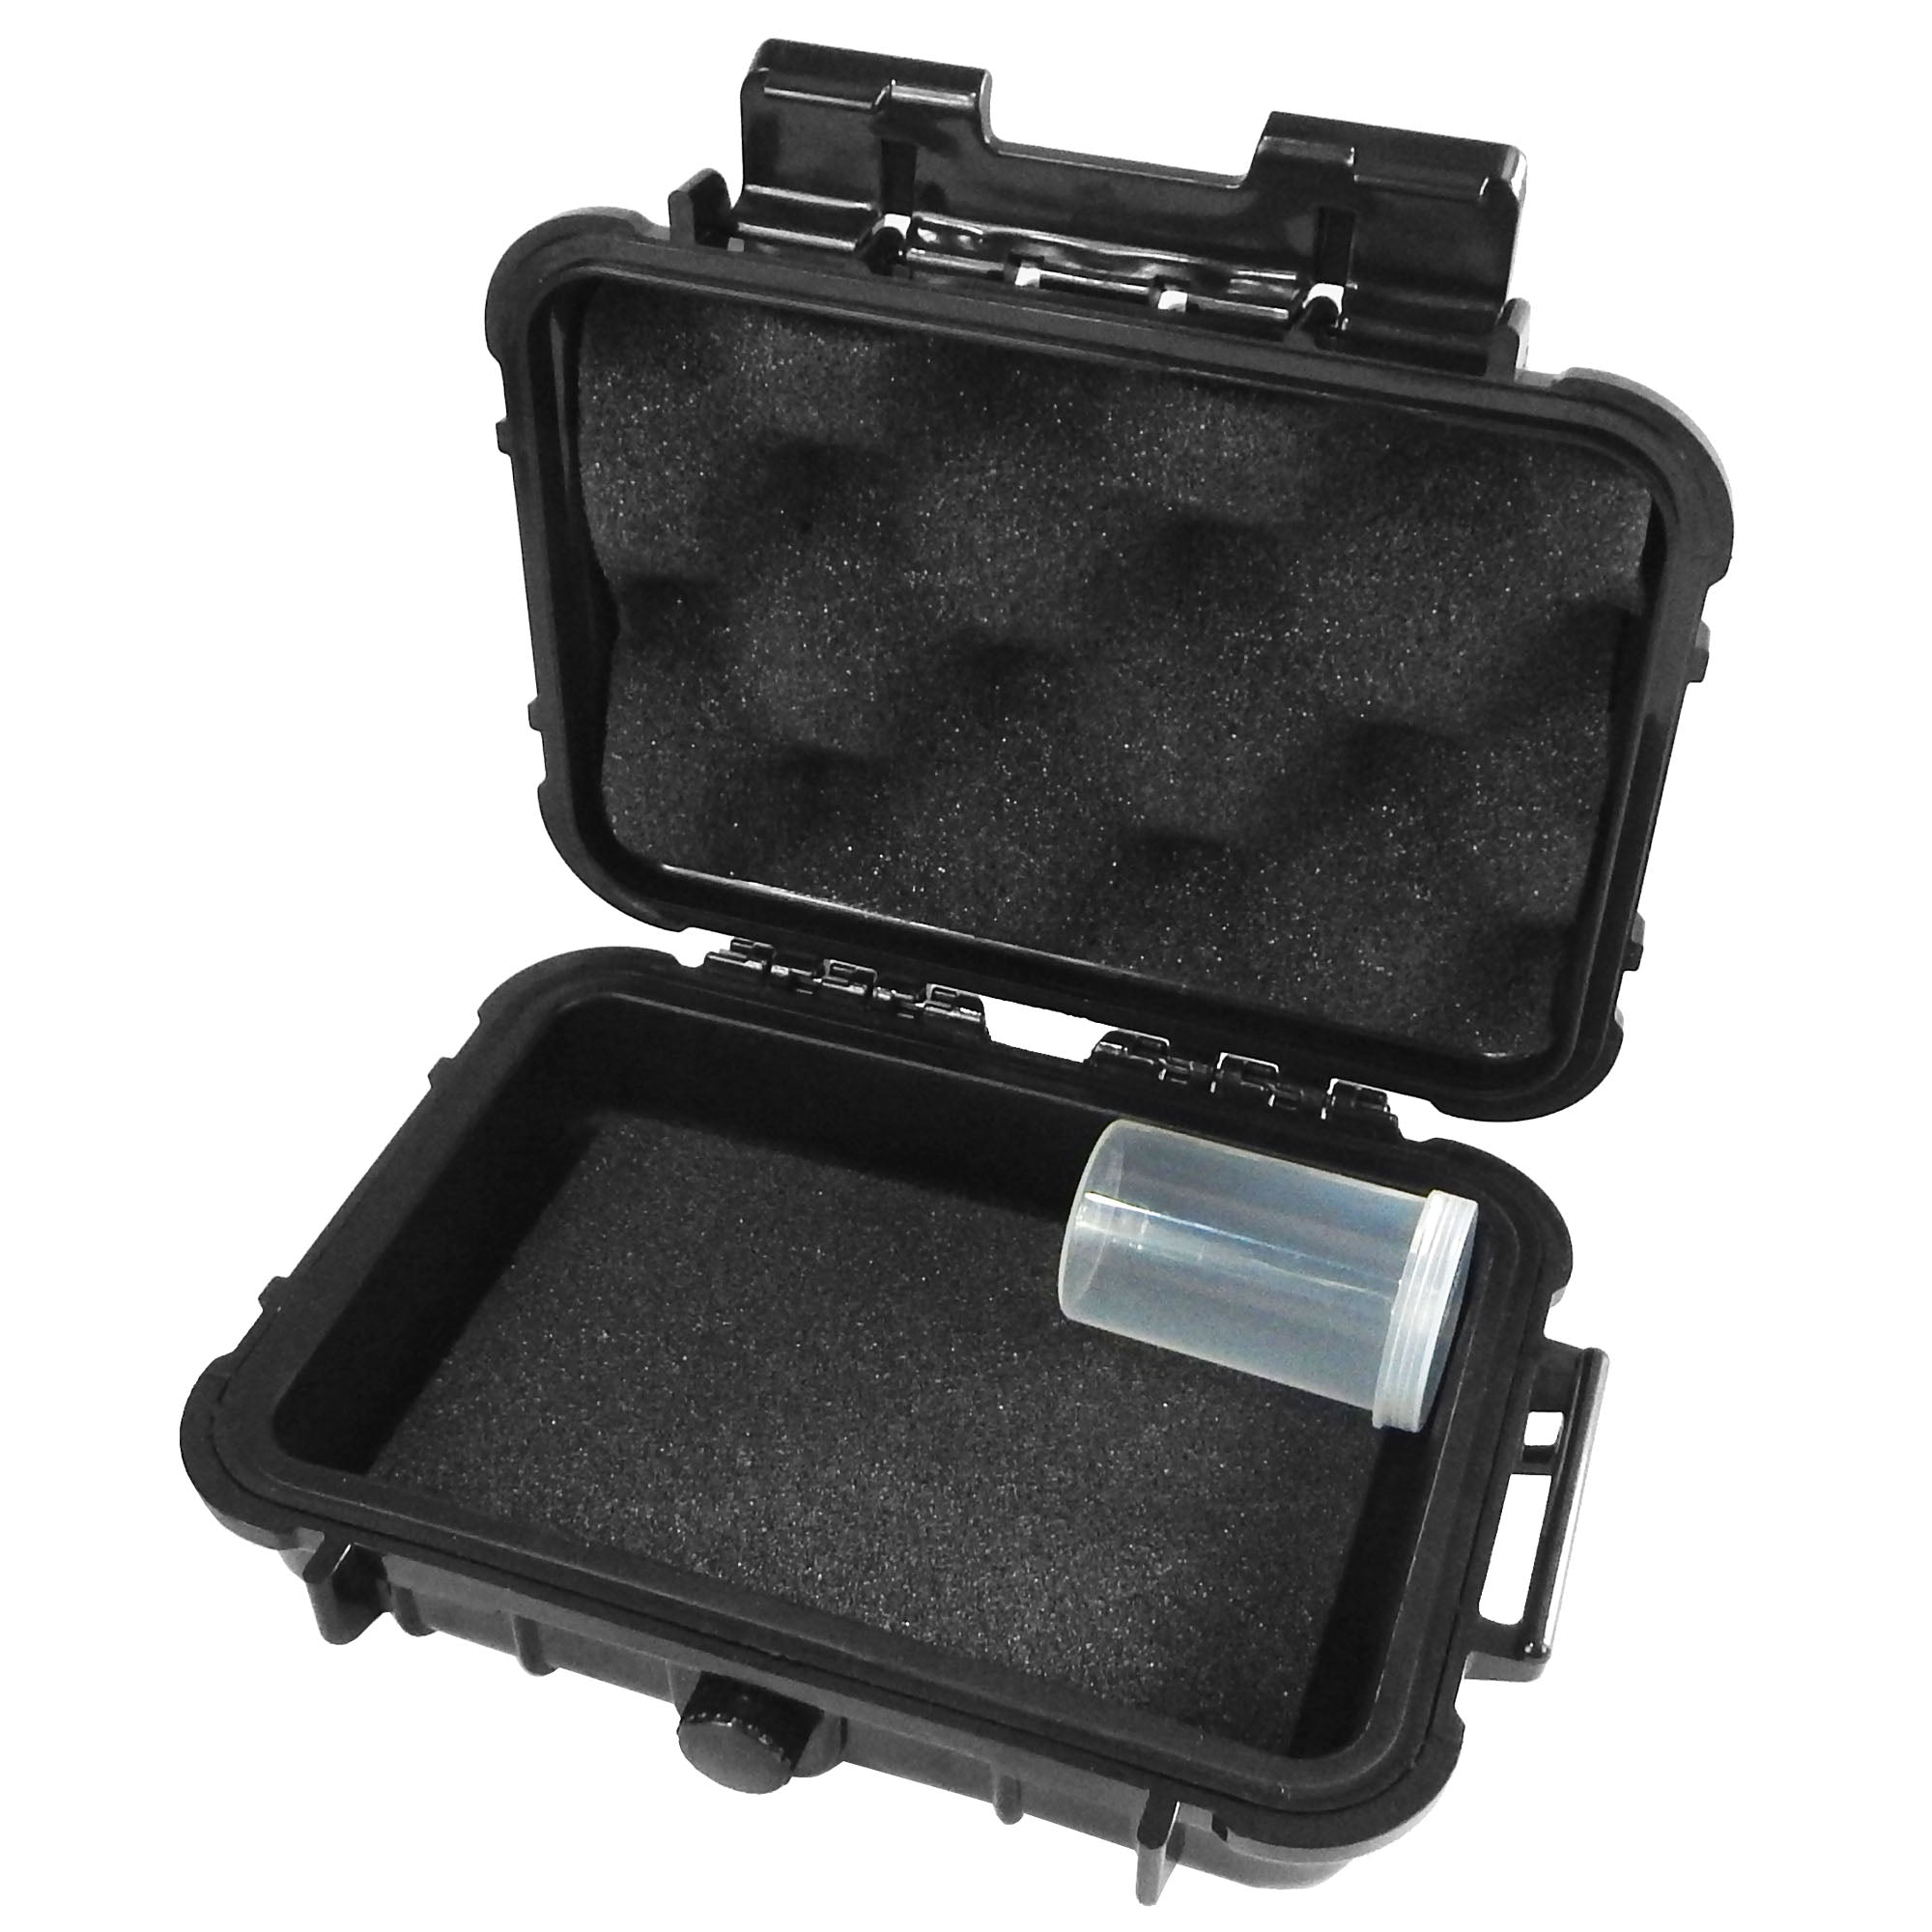  Smell Proof Travel Case For King Size Cones or Joints and Bic -  Water Proof and Super Durable : Health & Household